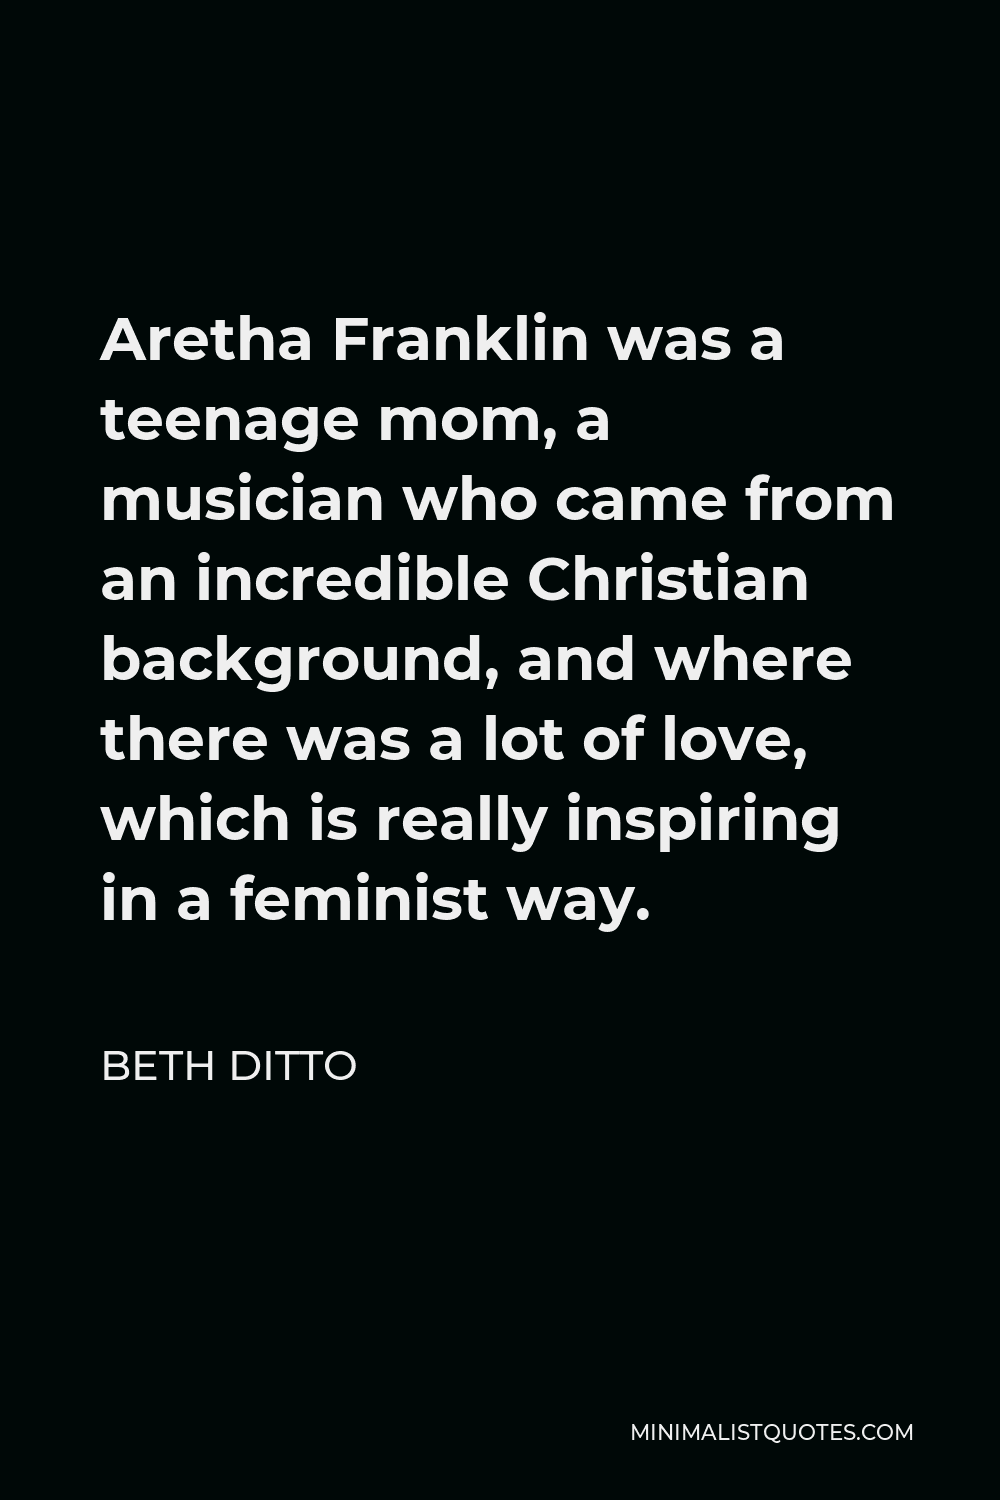 Beth Ditto Quote - Aretha Franklin was a teenage mom, a musician who came from an incredible Christian background, and where there was a lot of love, which is really inspiring in a feminist way.